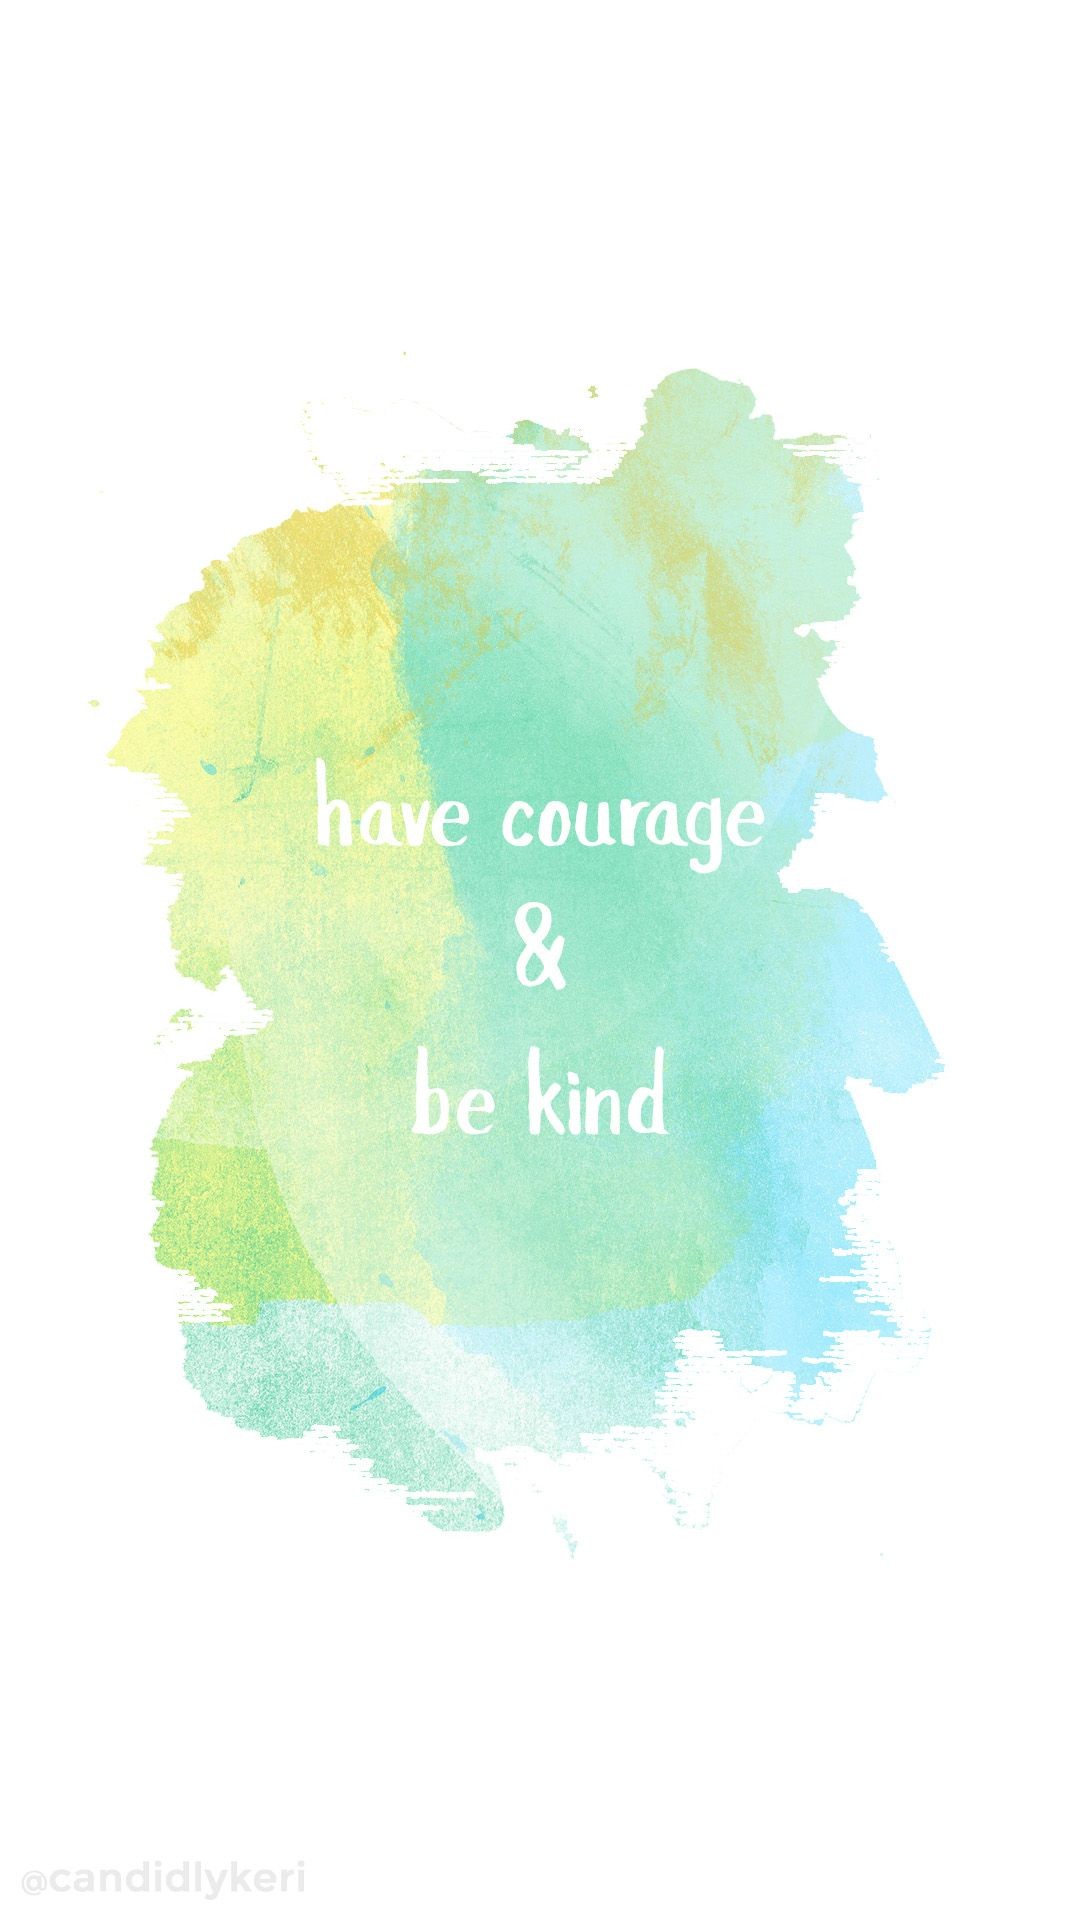 1080x1920 Have courage and be kind blue and yellow watercolor quote inspirational  wallpaper you can download for free on the blog! For any device; mobile,  desktop, ...